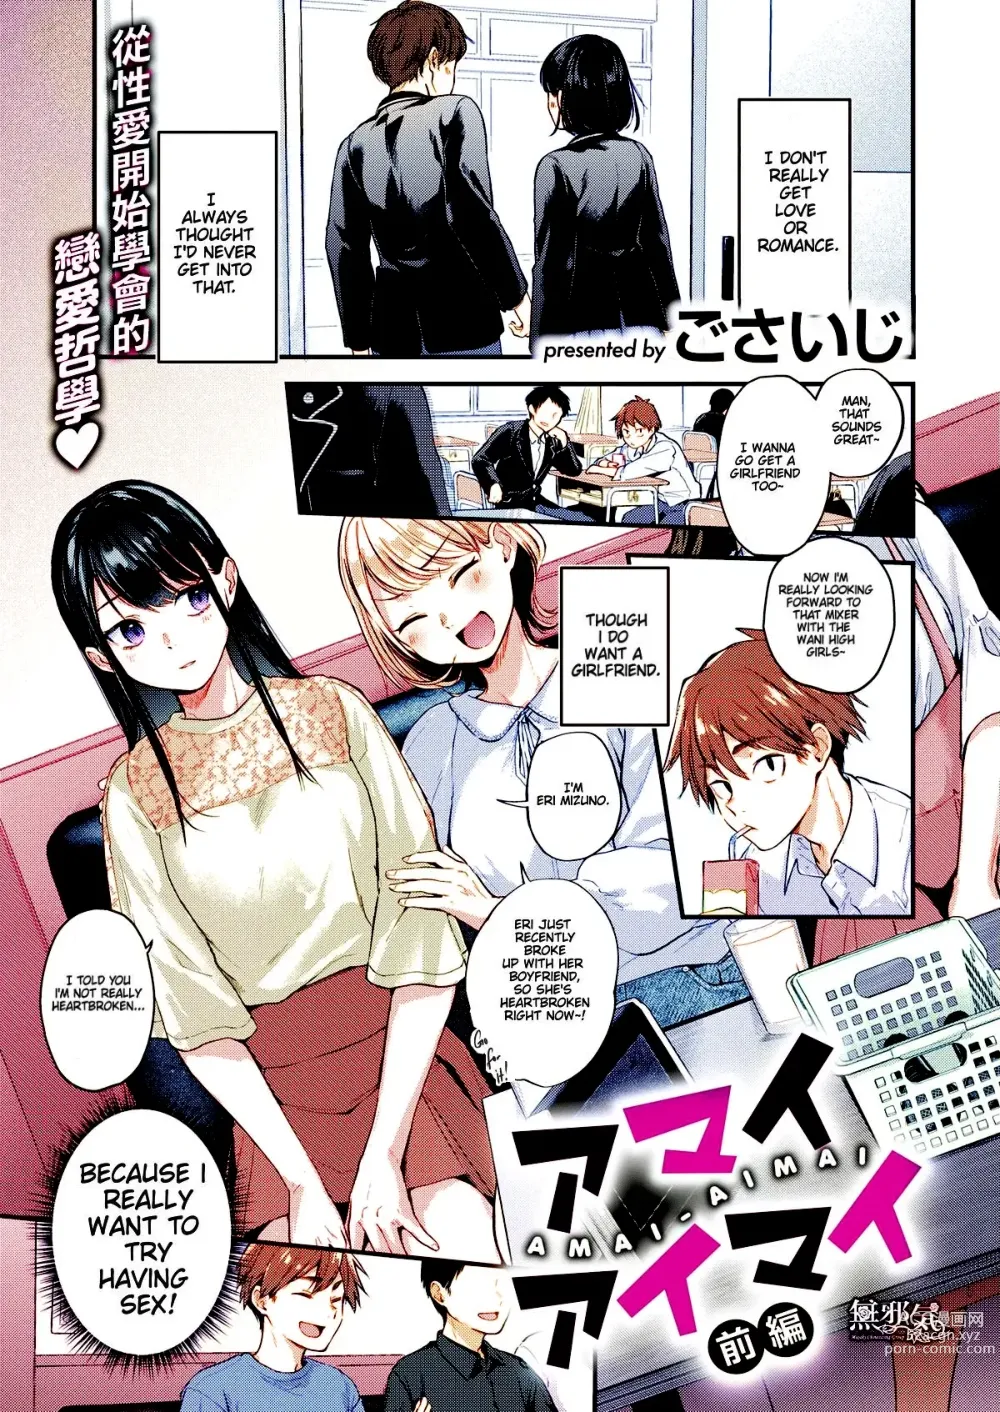 Page 1 of doujinshi Amai aimai chapter 1 color uncensored